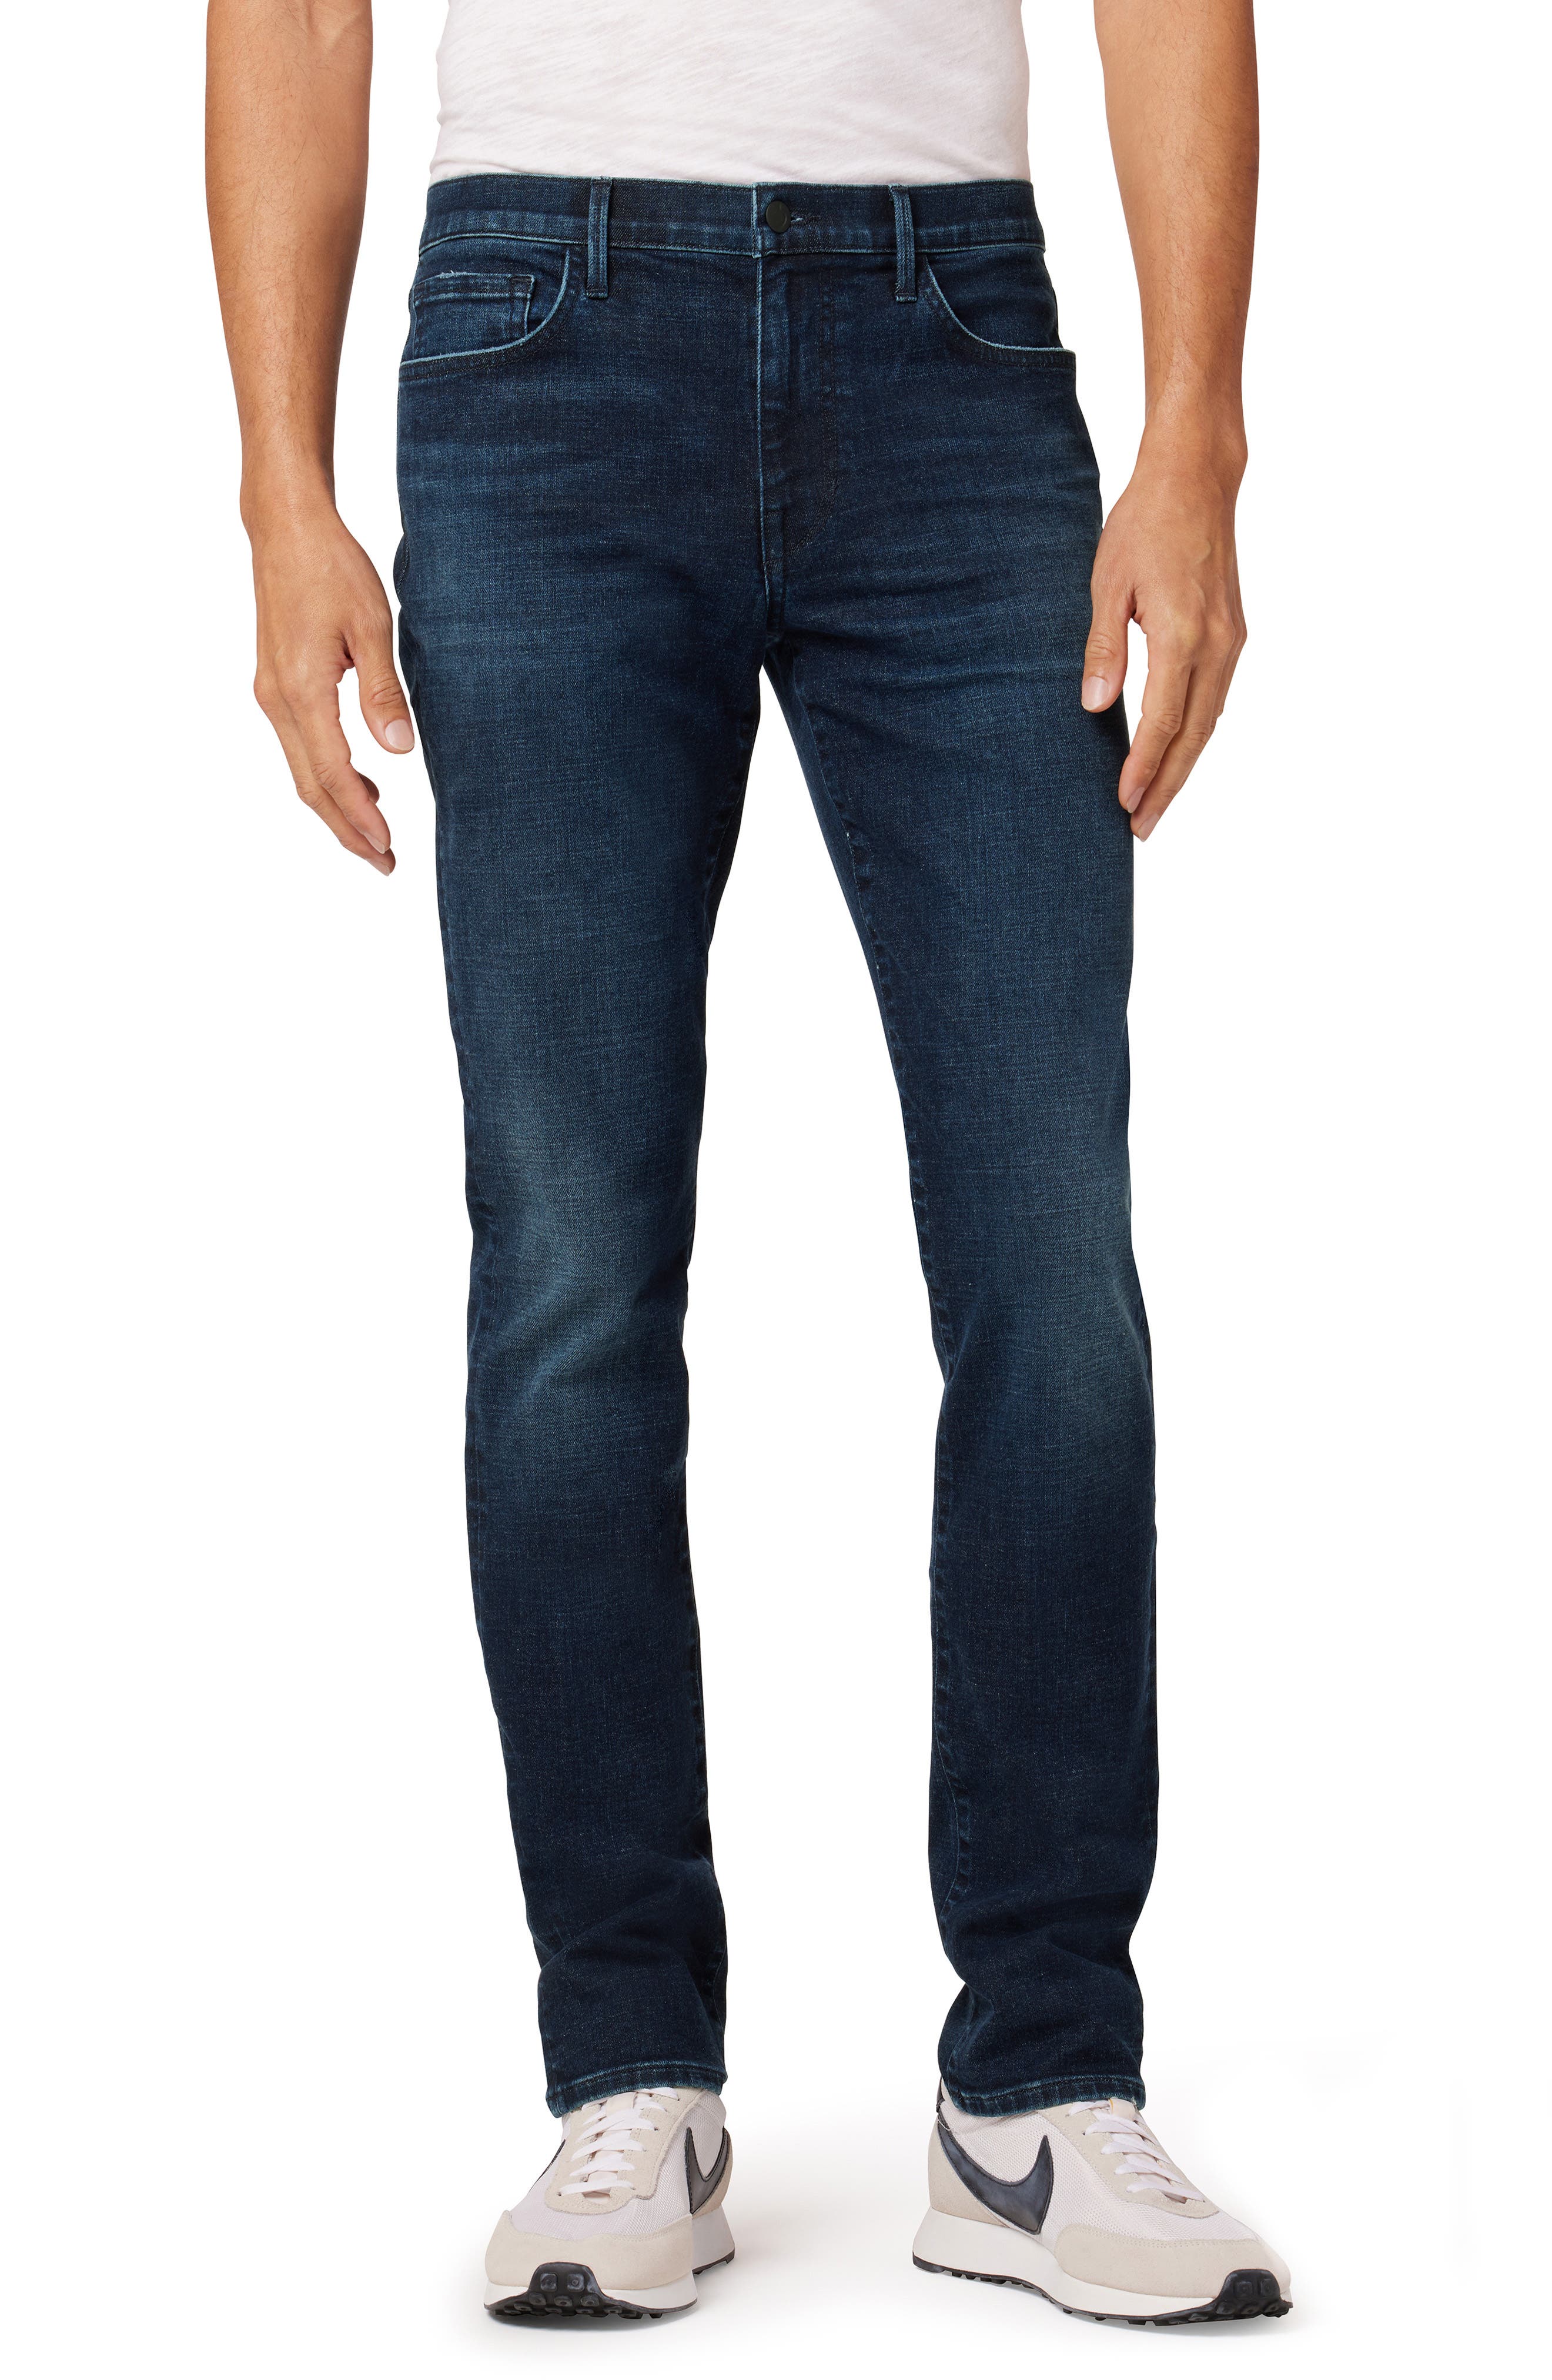 Joes Jeans Mens The Slim Fit Colored Jean